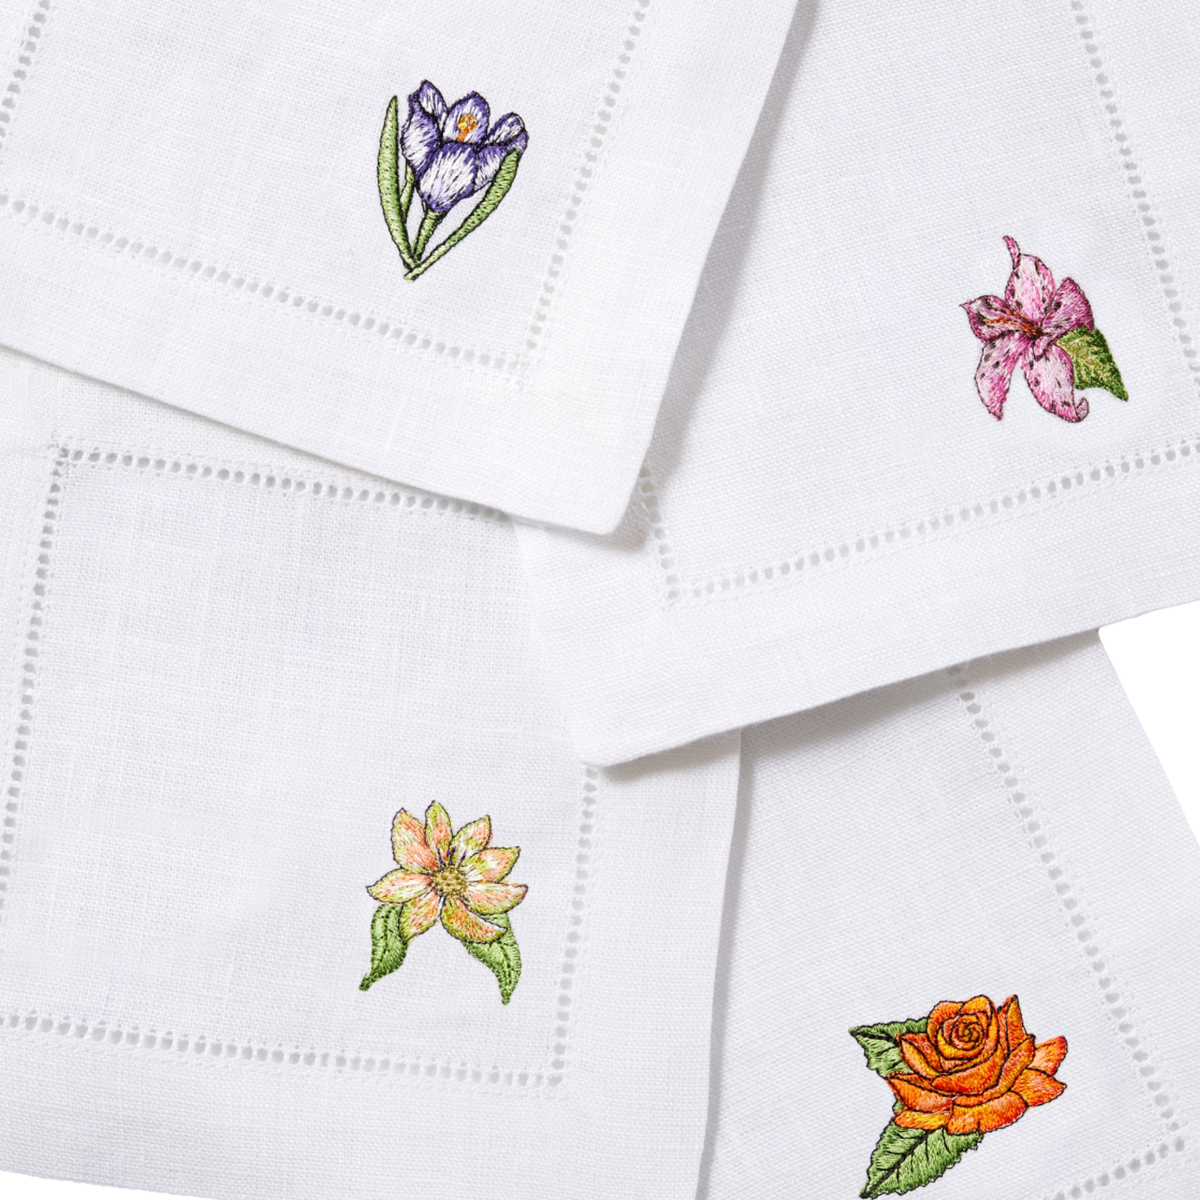 Swatch Sample of Sferra Fioritura Embroidered Cocktail Napkins